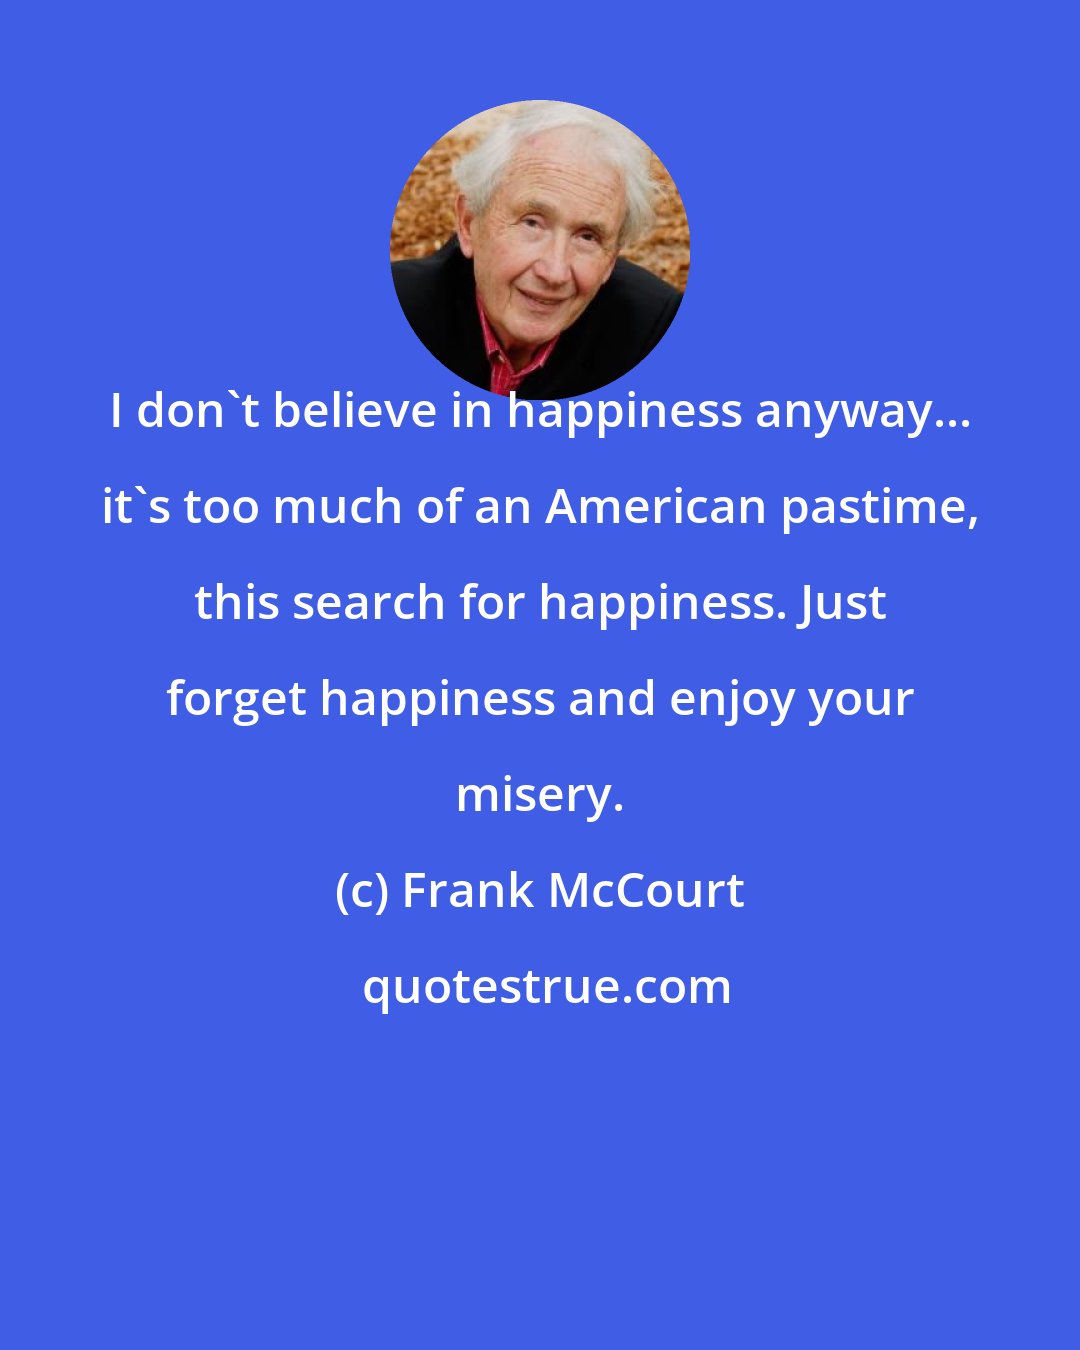 Frank McCourt: I don't believe in happiness anyway... it's too much of an American pastime, this search for happiness. Just forget happiness and enjoy your misery.